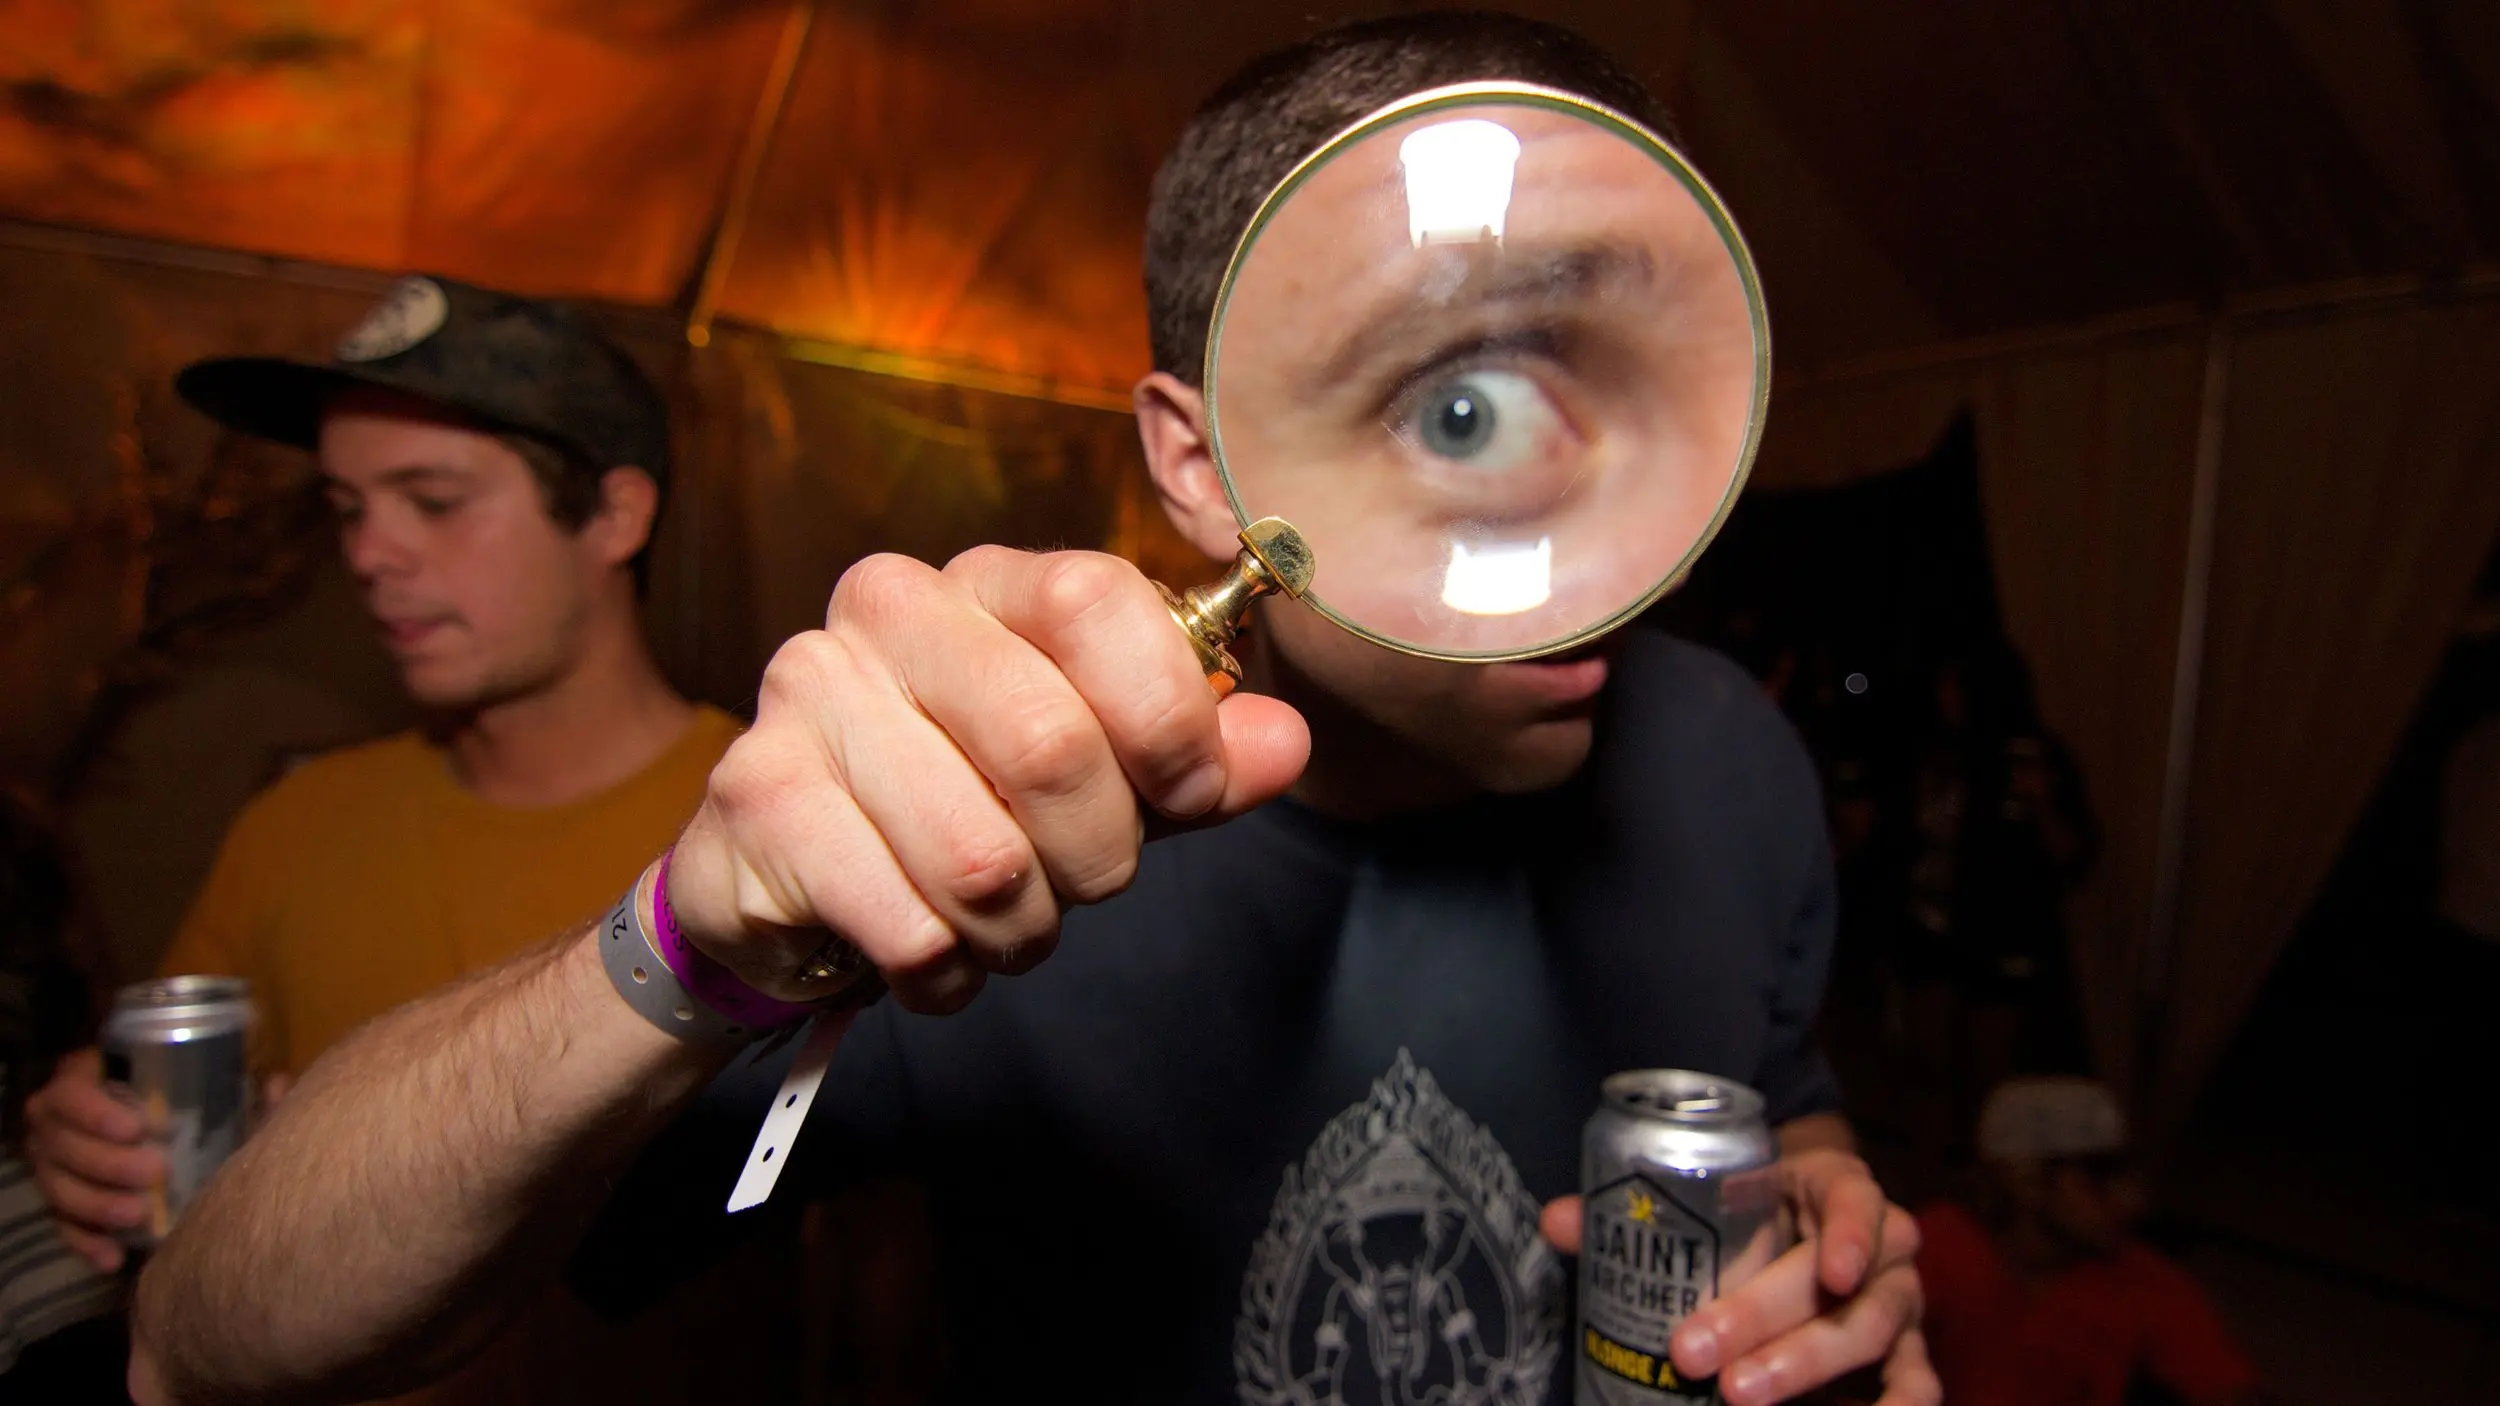 Man holding a magnifying glass up to his eye creating a visual representation of asking "Why?"